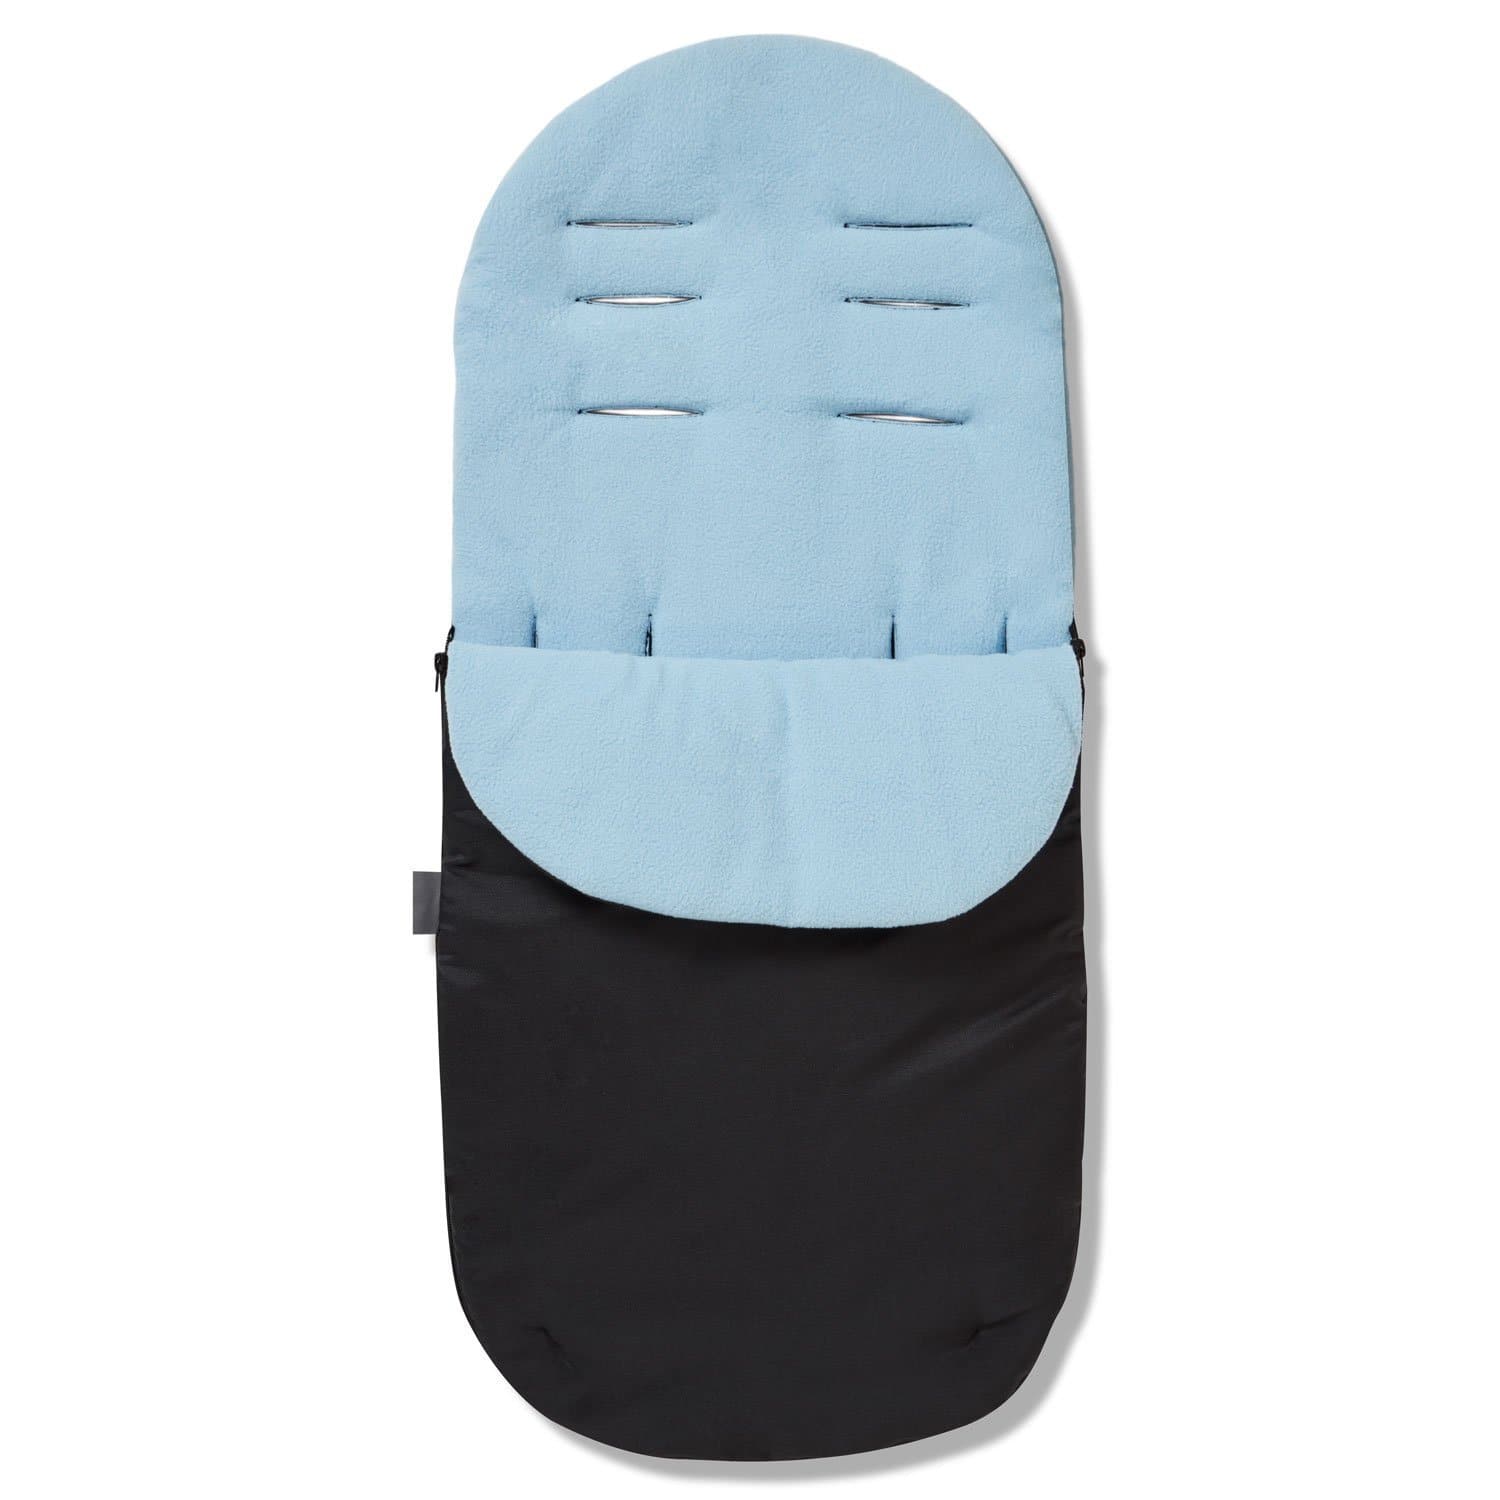 Footmuff / Cosy Toes Compatible with Red Castle - Light Blue / Fits All Models | For Your Little One